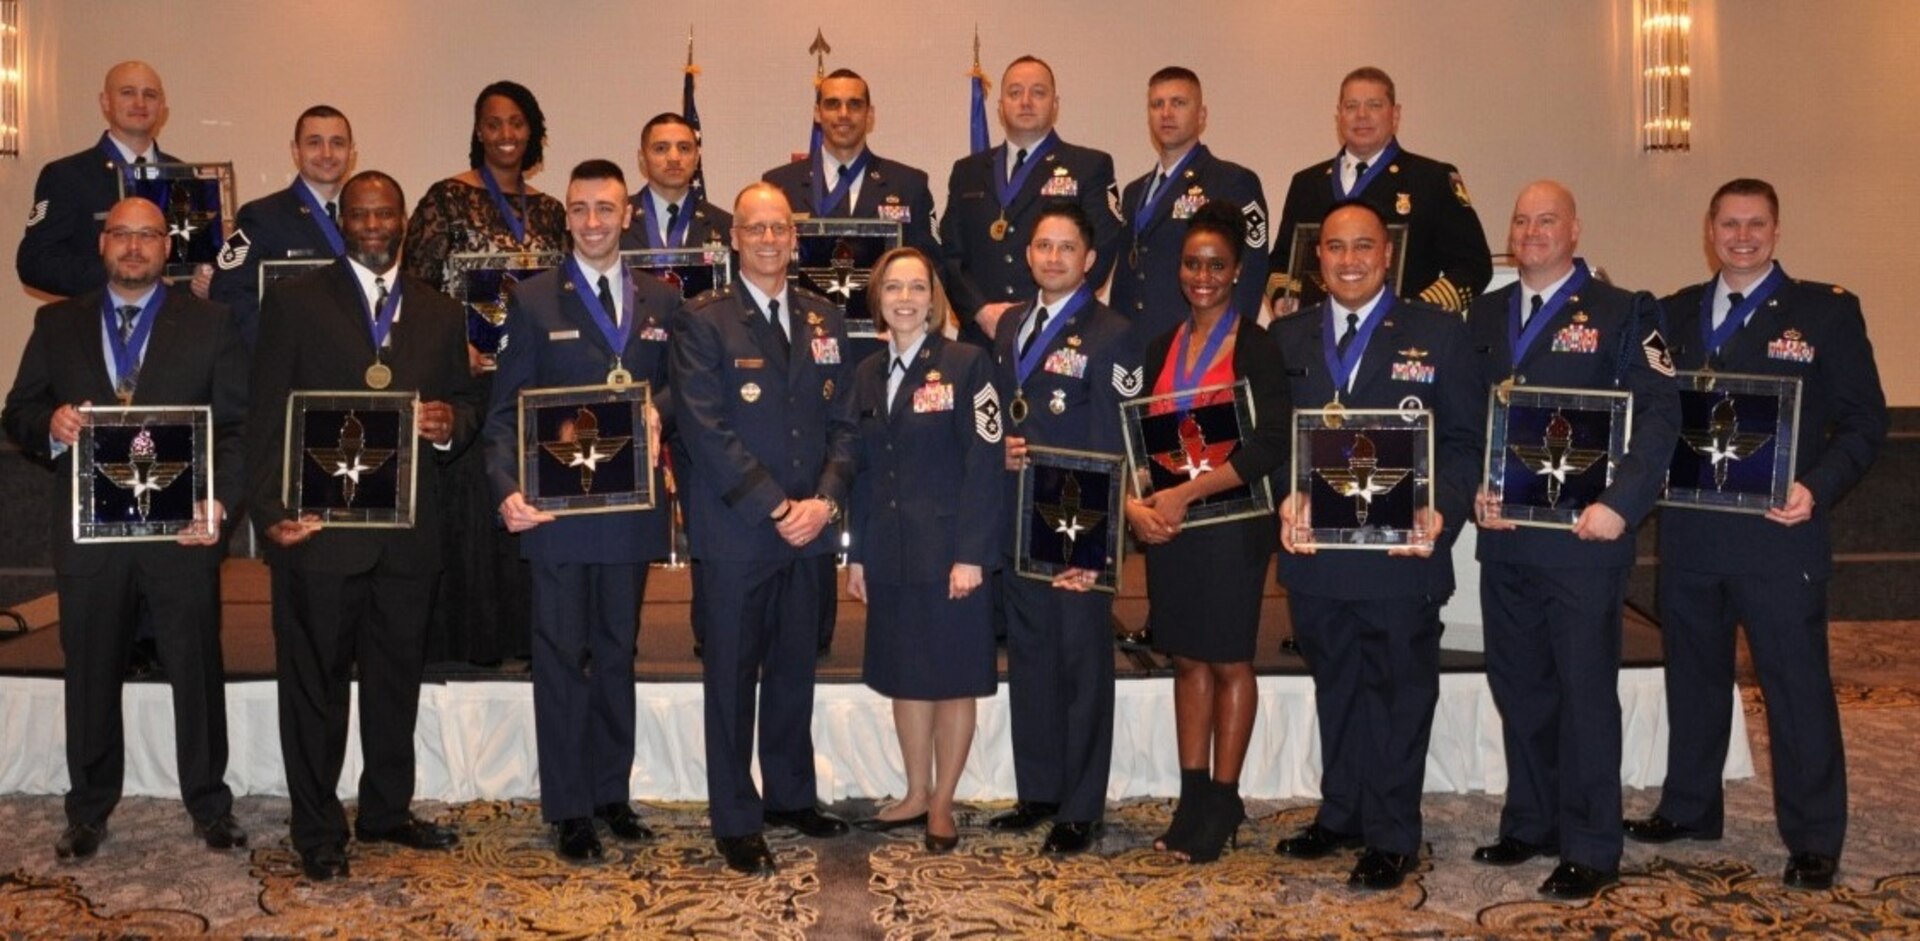 Winners of the 2018 Air Education and Training Command Outstanding Airmen of the Year awards stand with Maj. Gen. Mark Weatherington (third from left) and command chief of AETC, Chief Master Sgt. Juliet Gudgel (fourth from left) during a ceremony in Orlando, Fla., Feb. 26, 2019. A total of 21 Airmen were recognized at the event and move on to the the Air Force-level competition.